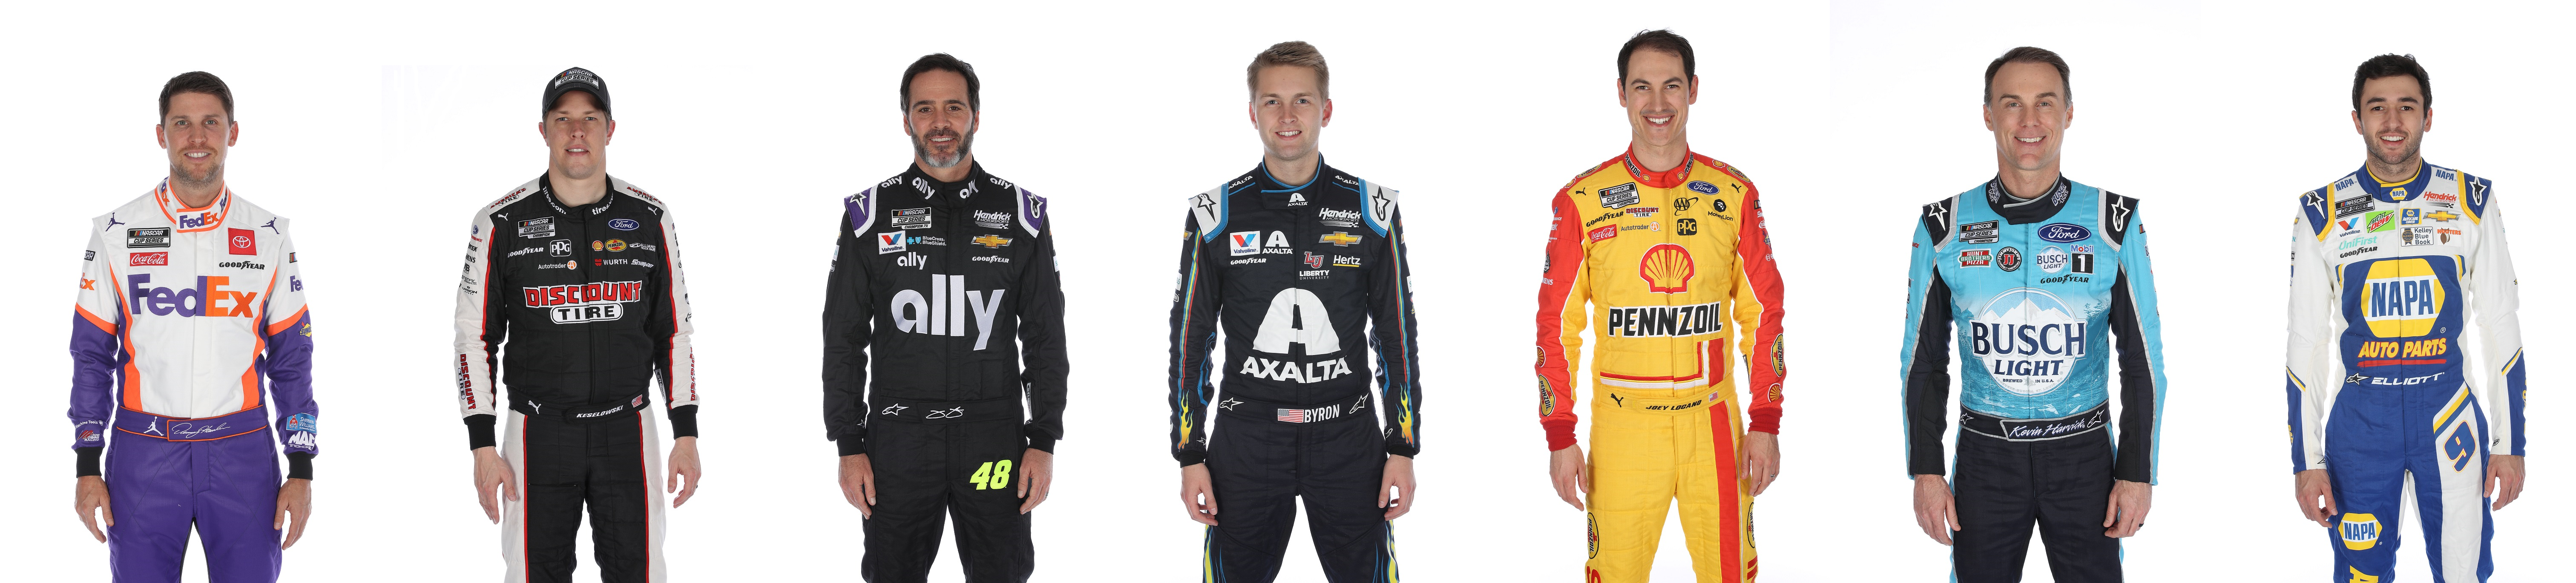 With seven different picks for tonight's Coca-Cola 600 at Charlotte, it's a wide open race!